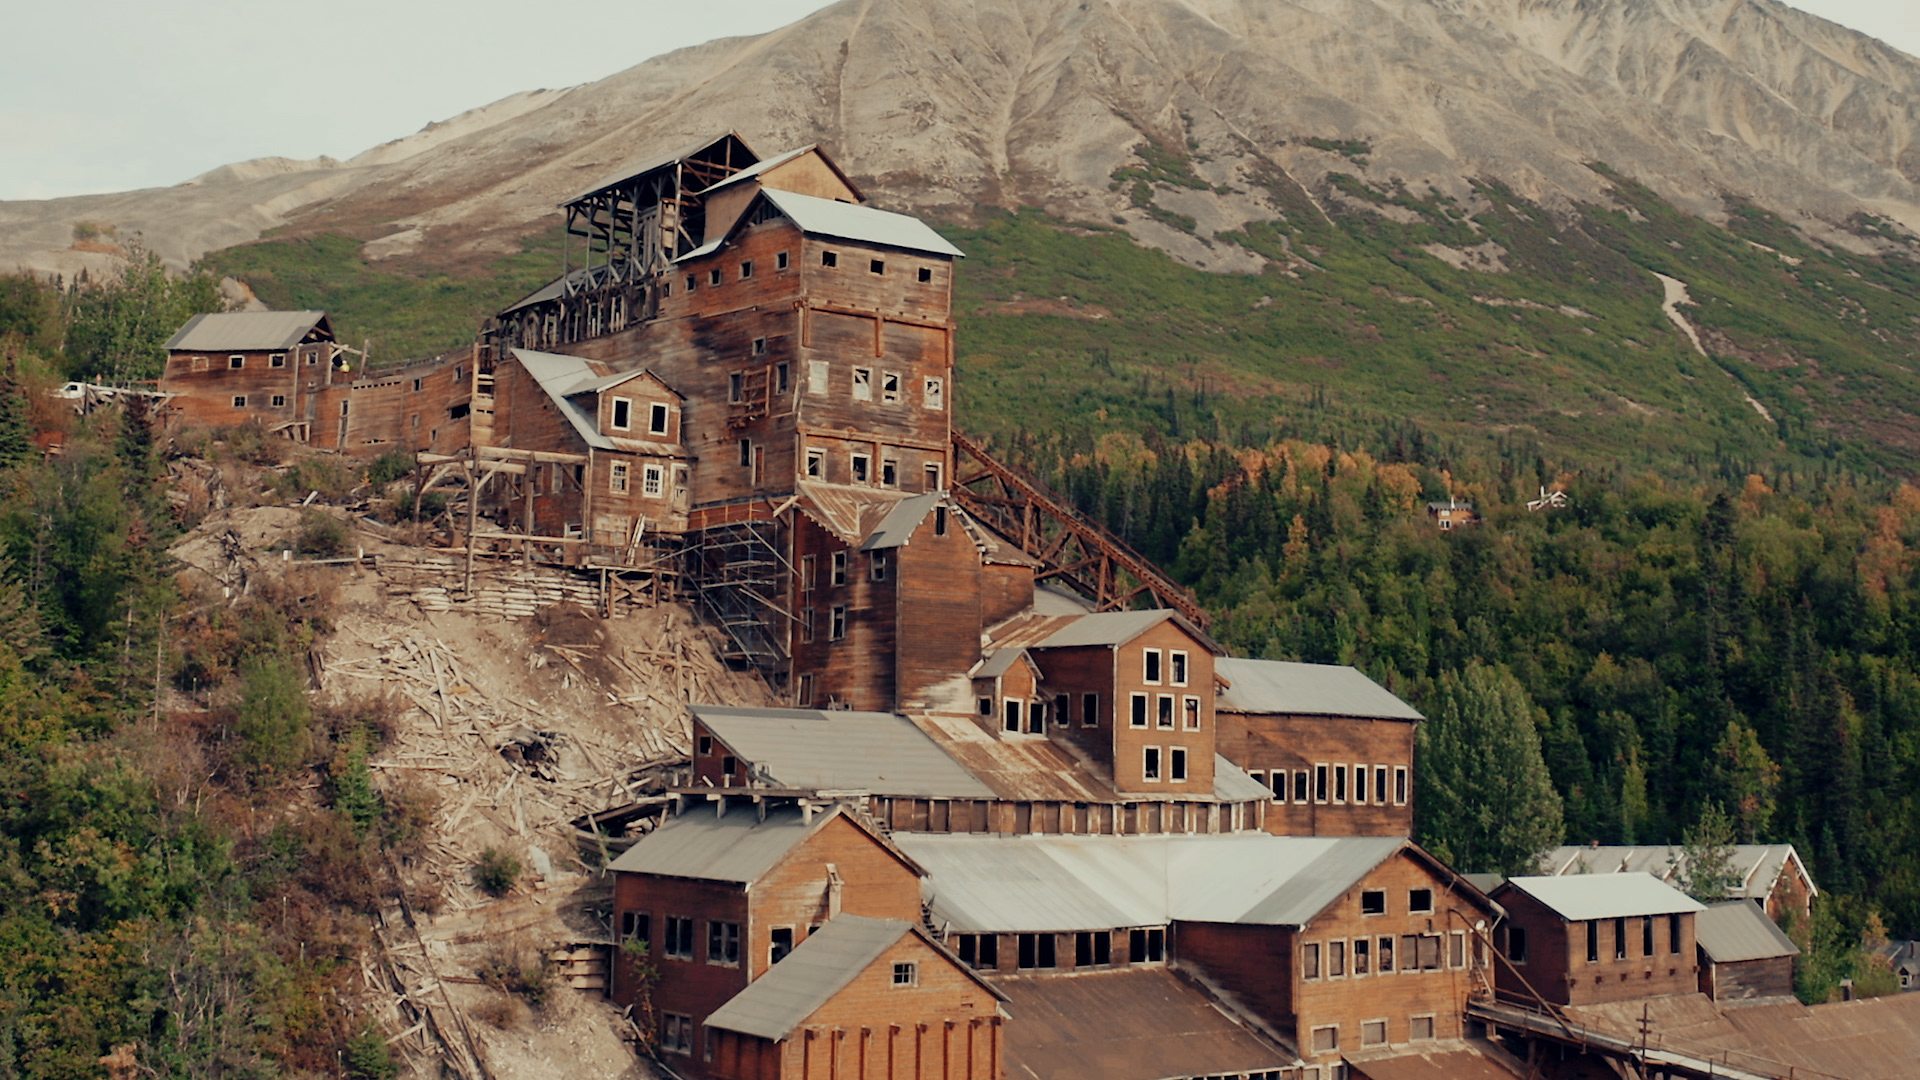 The picturesque ghost town at the edge of the world